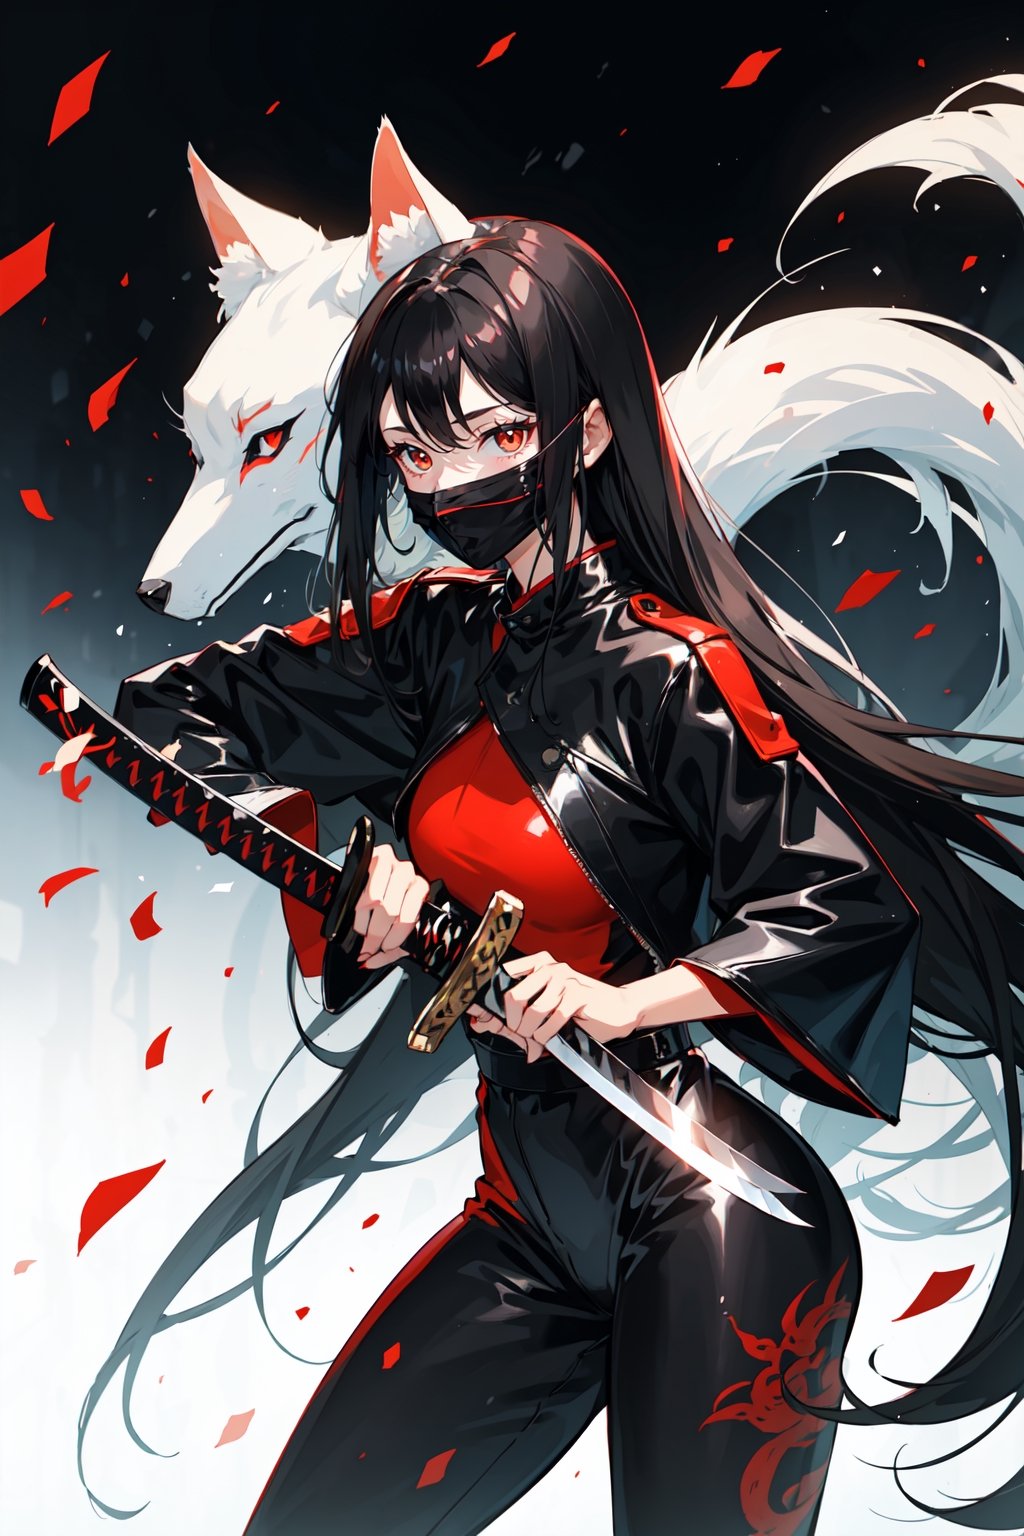 A girl with long black hair wearing a white kitsune mask with red designs, wearing a black leather jumpsuit and holding a katana sword in her hands 